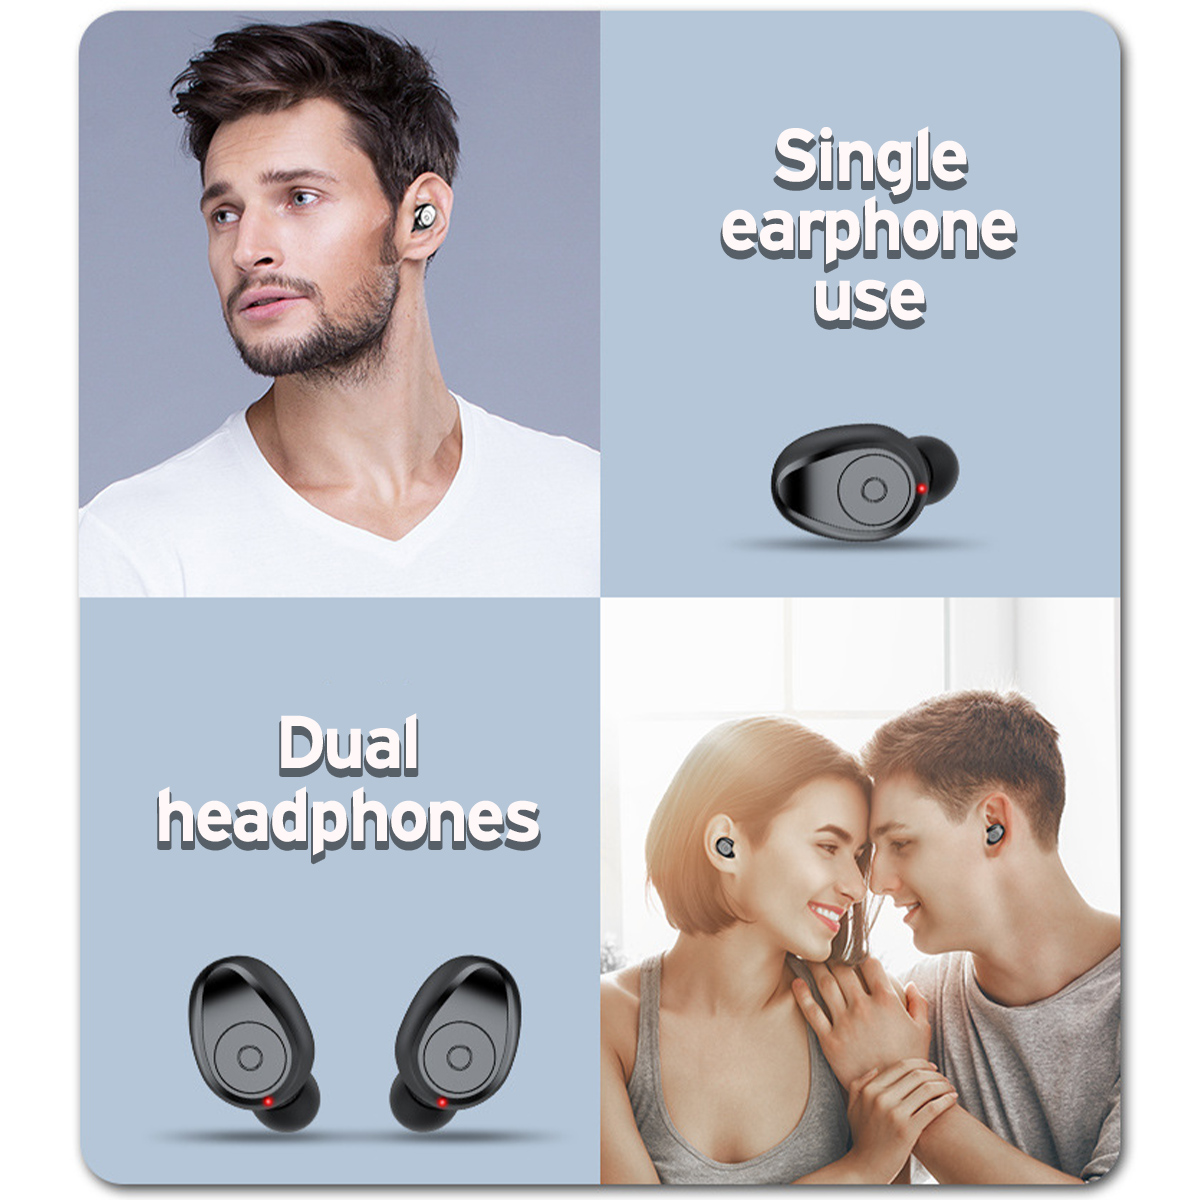 Mini-Wireless-Stereo-bluetooth-50-Earbuds-IPX7-Waterproof-Touch-Earphone-Noise-Reduction-Handsfree-H-1519860-6